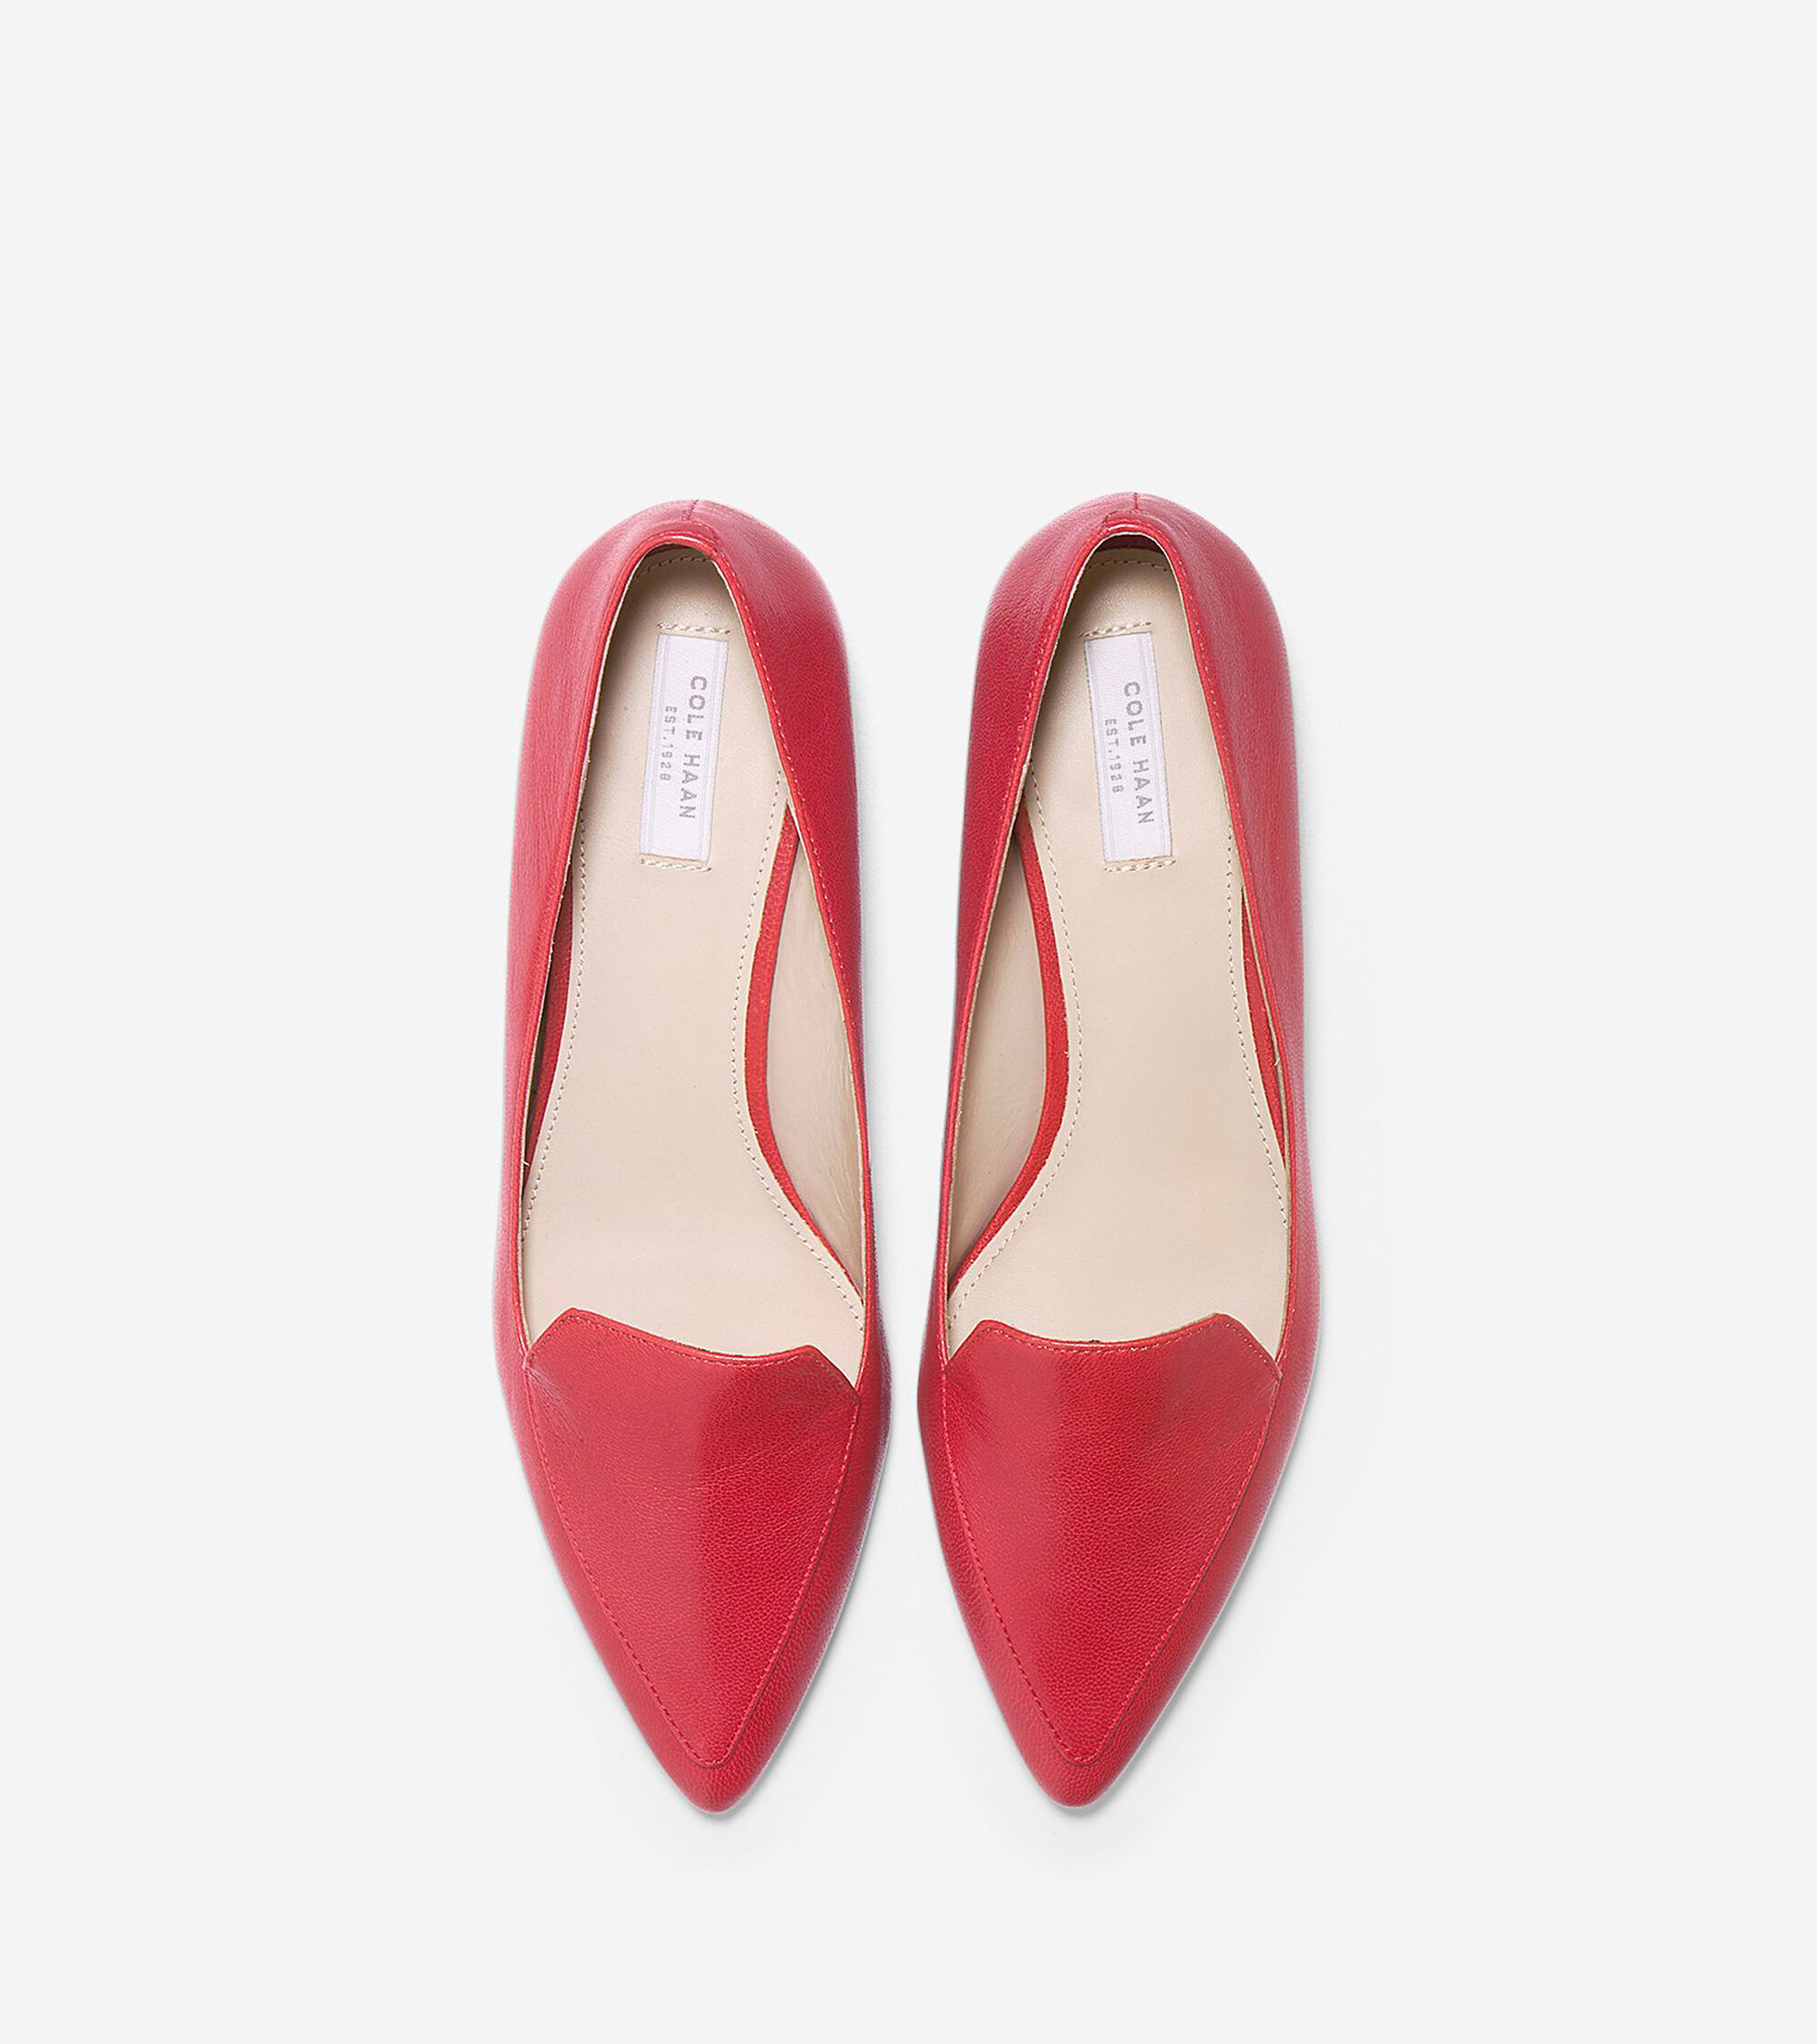 Women's Dellora Skimmers in Tango Red Leather | Cole Haan